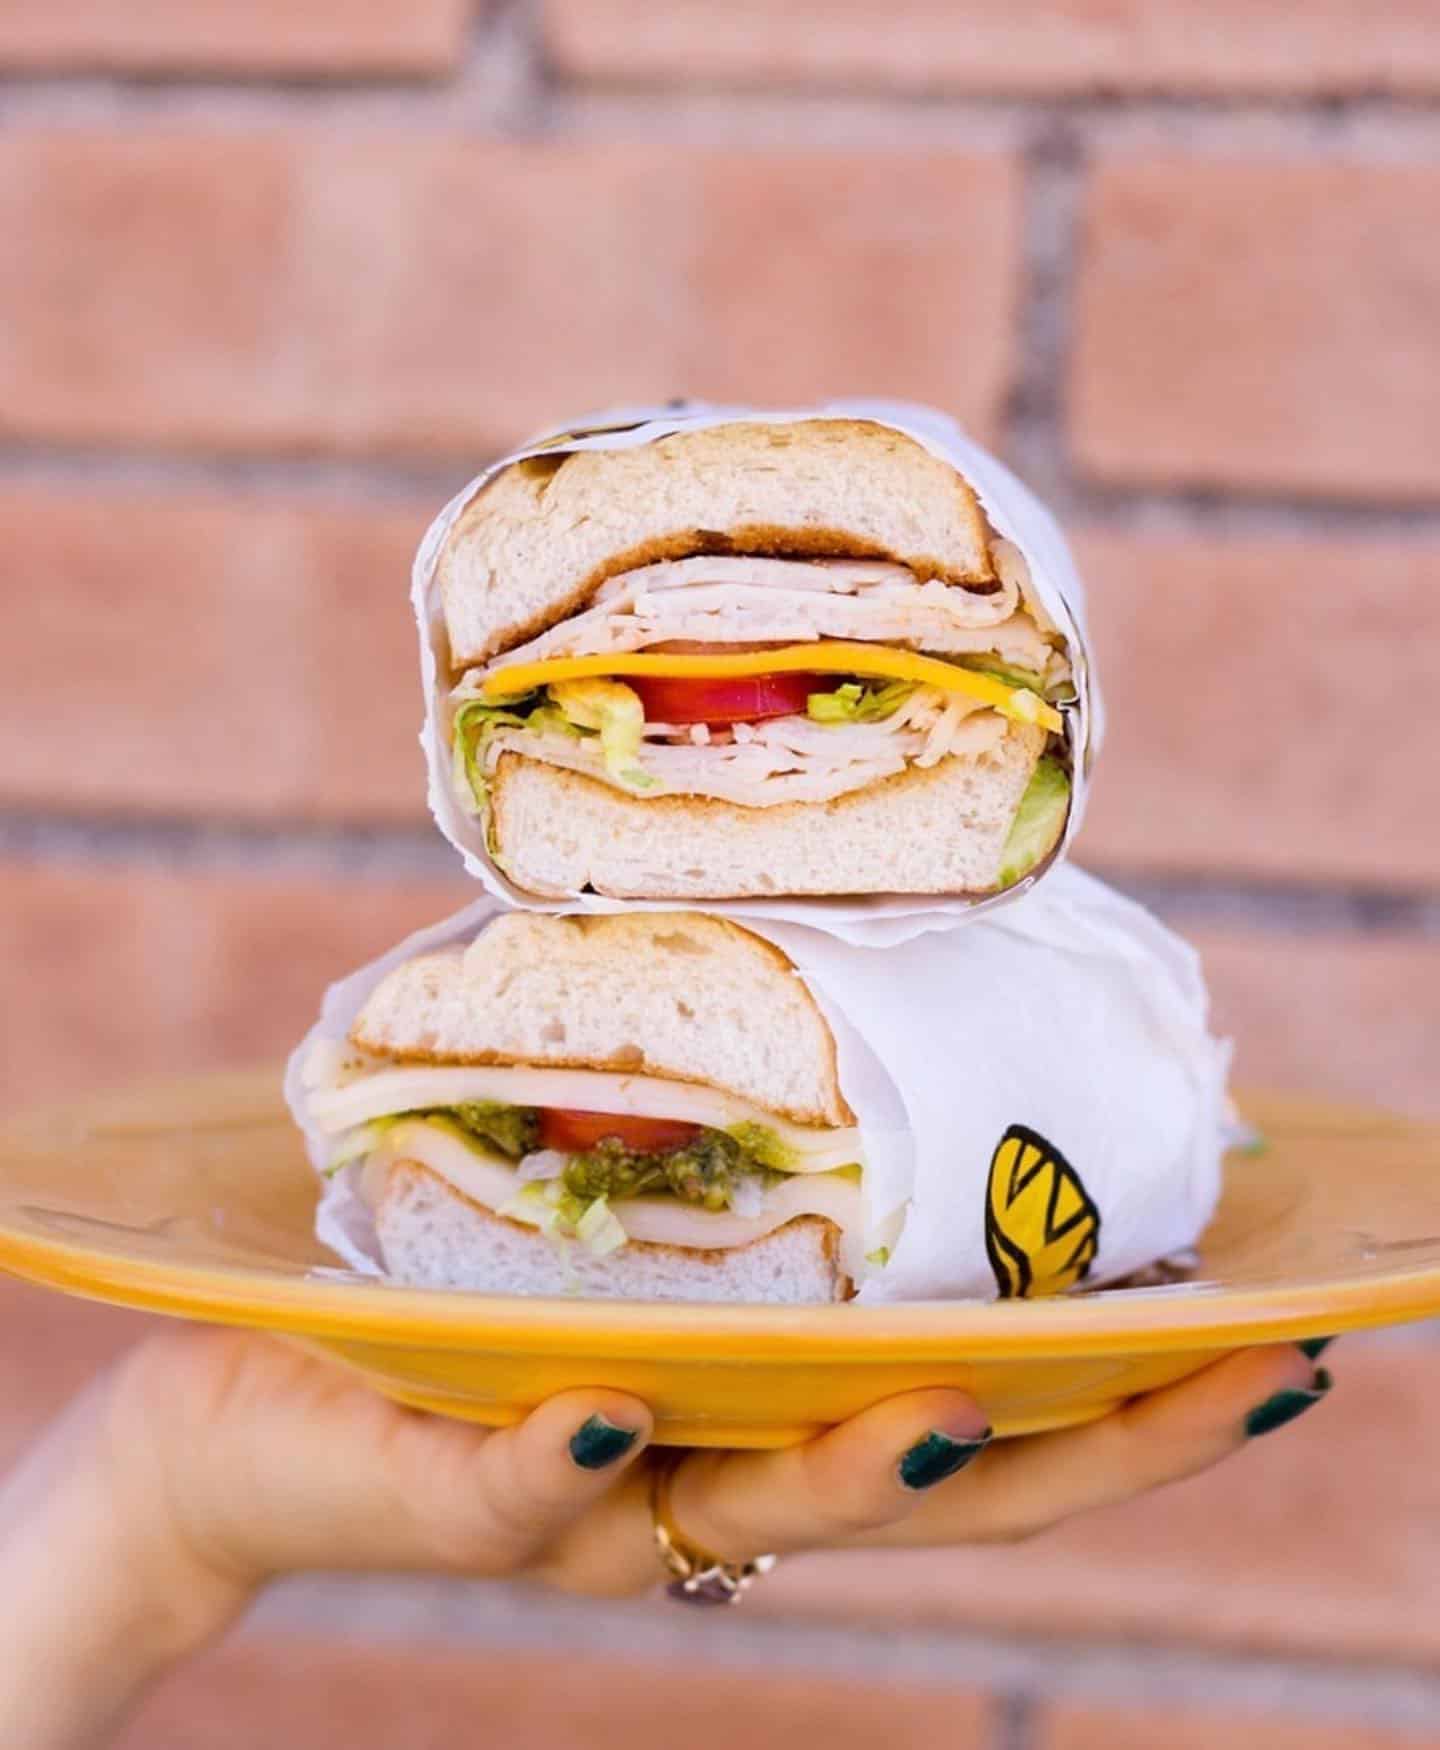 Our tastebuds are wishing we had a wich!

What’s your go-to order at Which Wich?